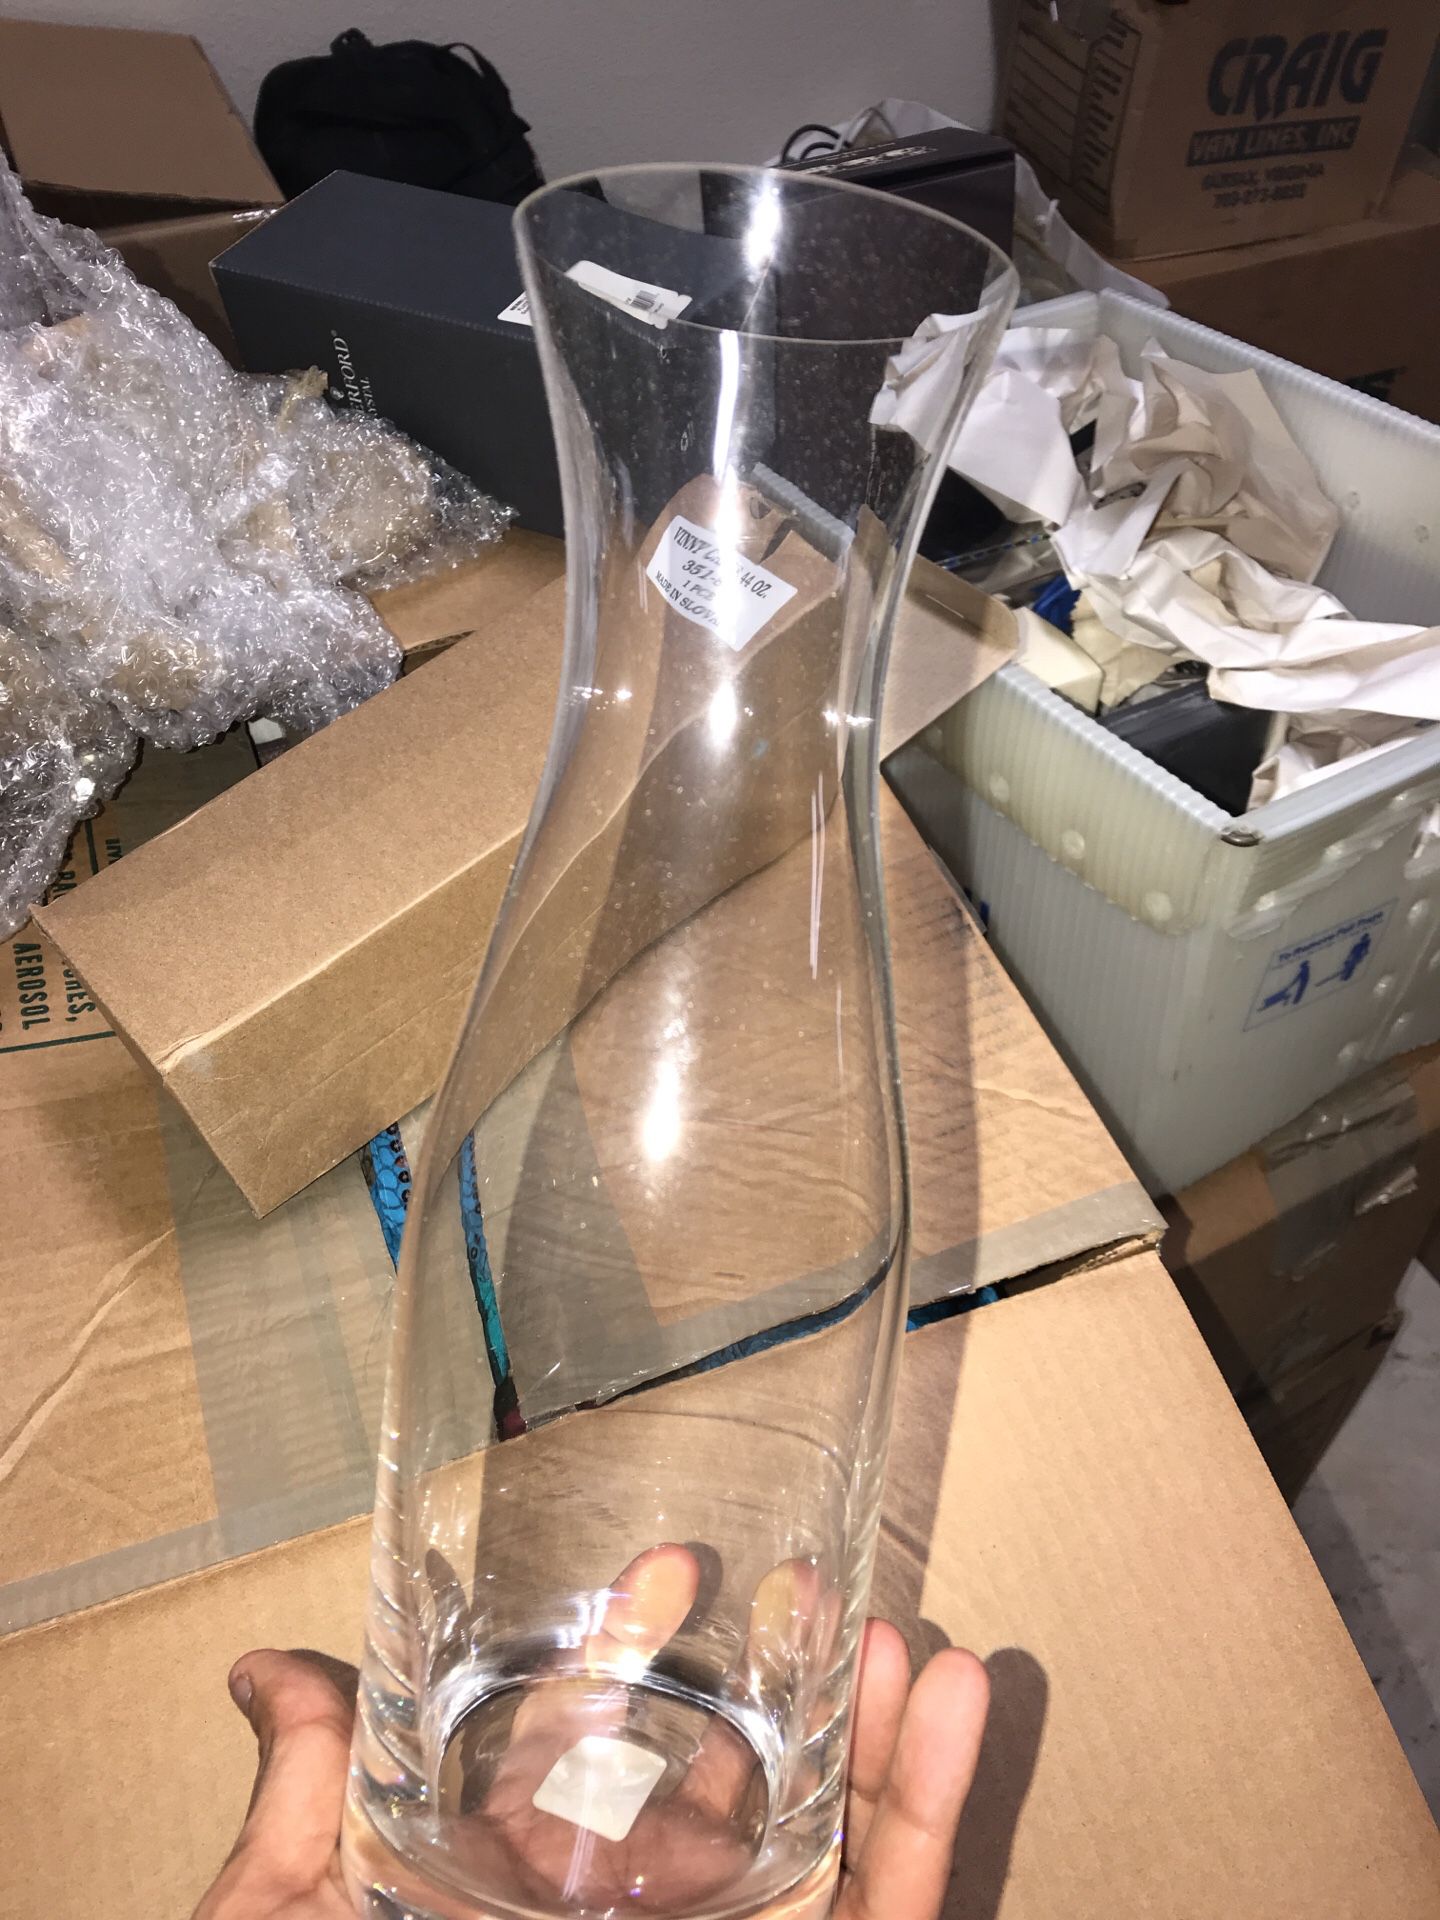 Crate and barrel wine carafe never used